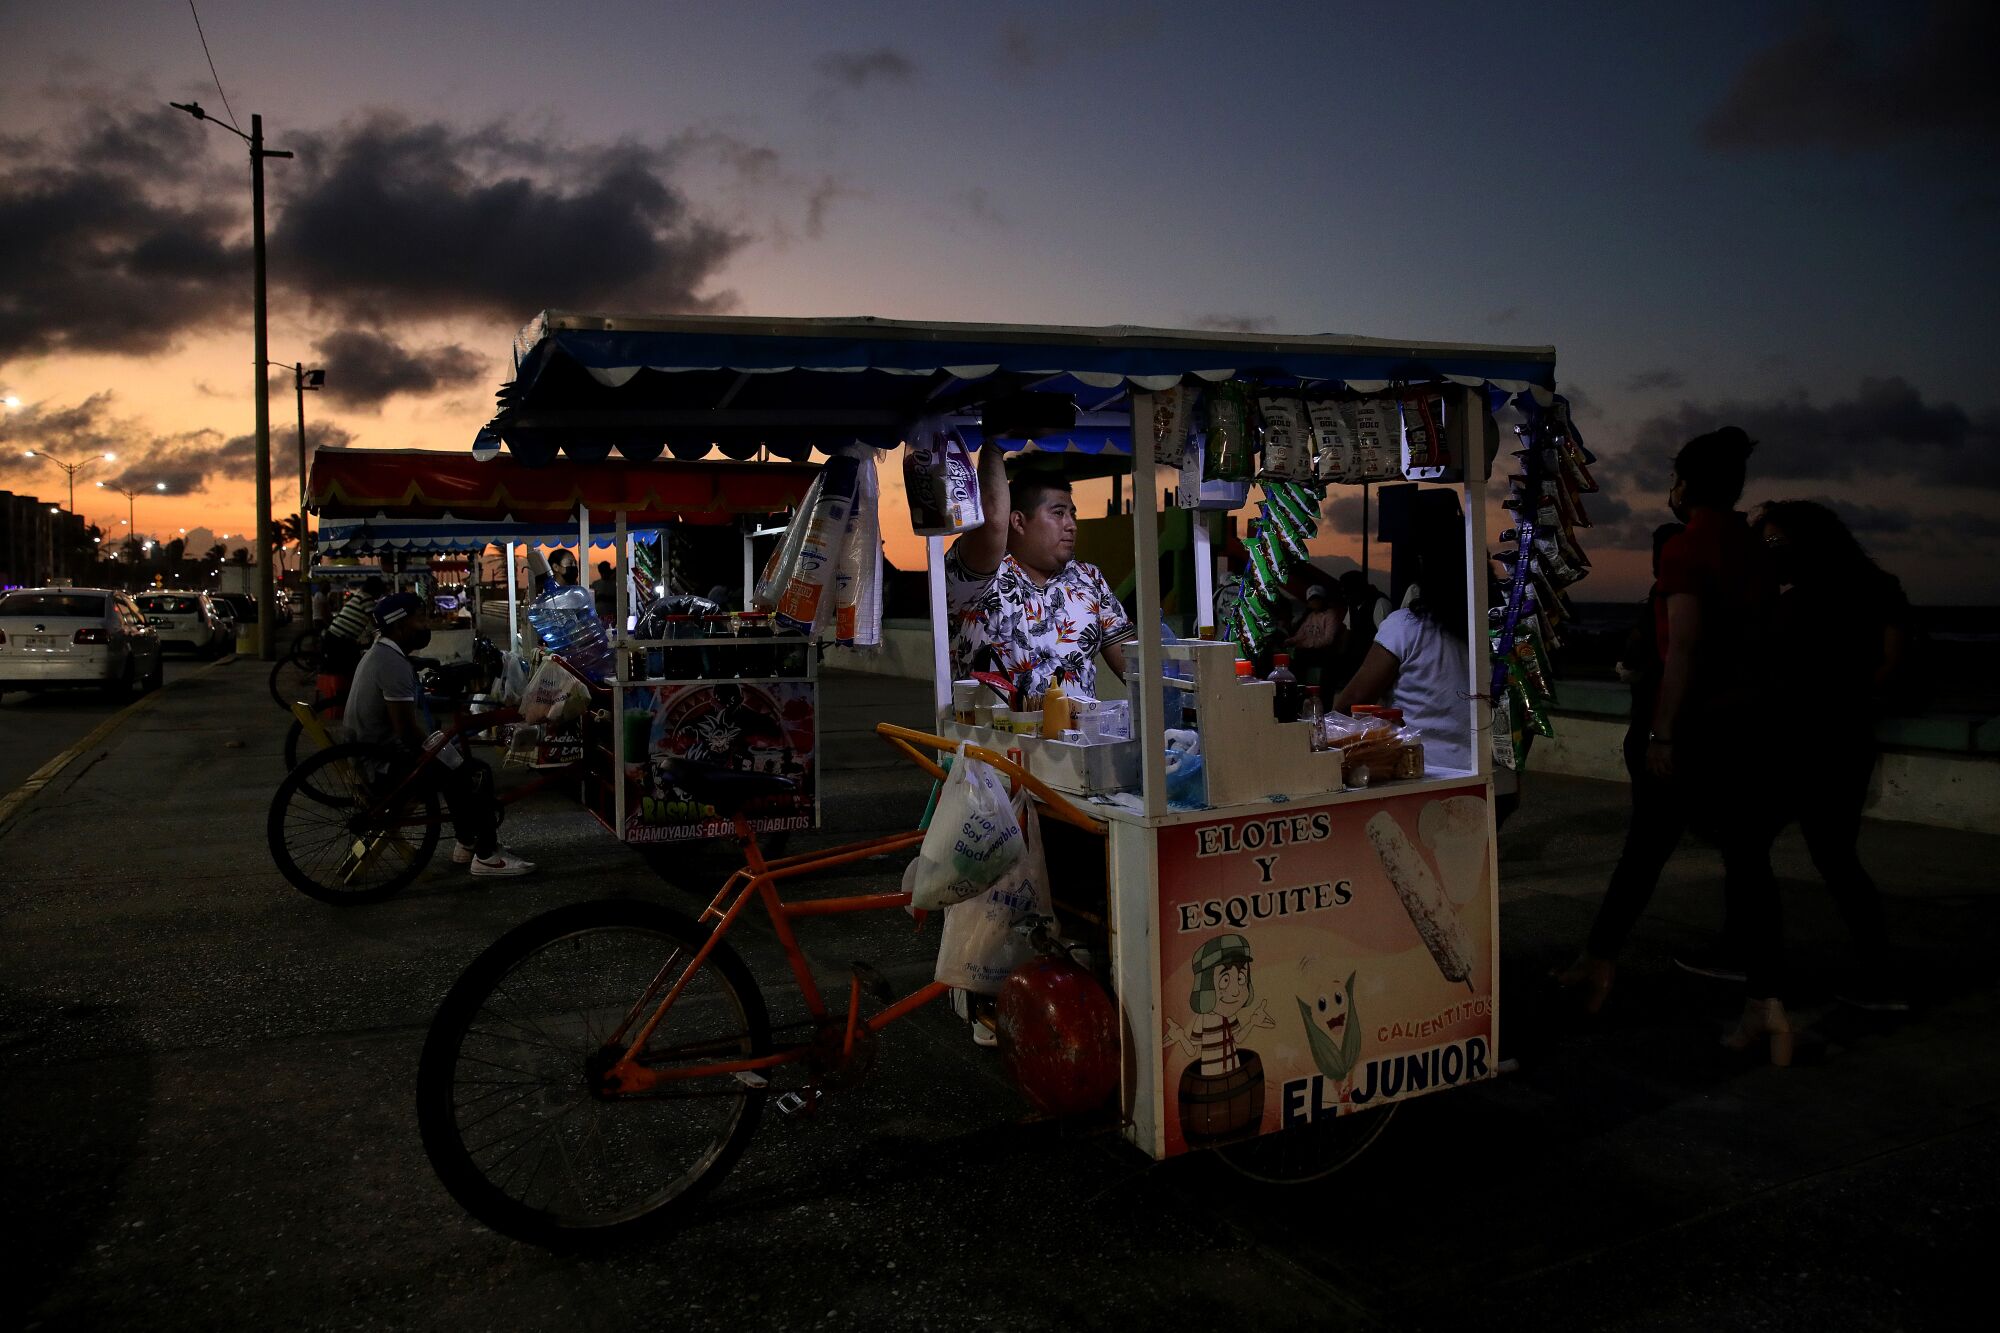 A man sells snacks near the waterfront.